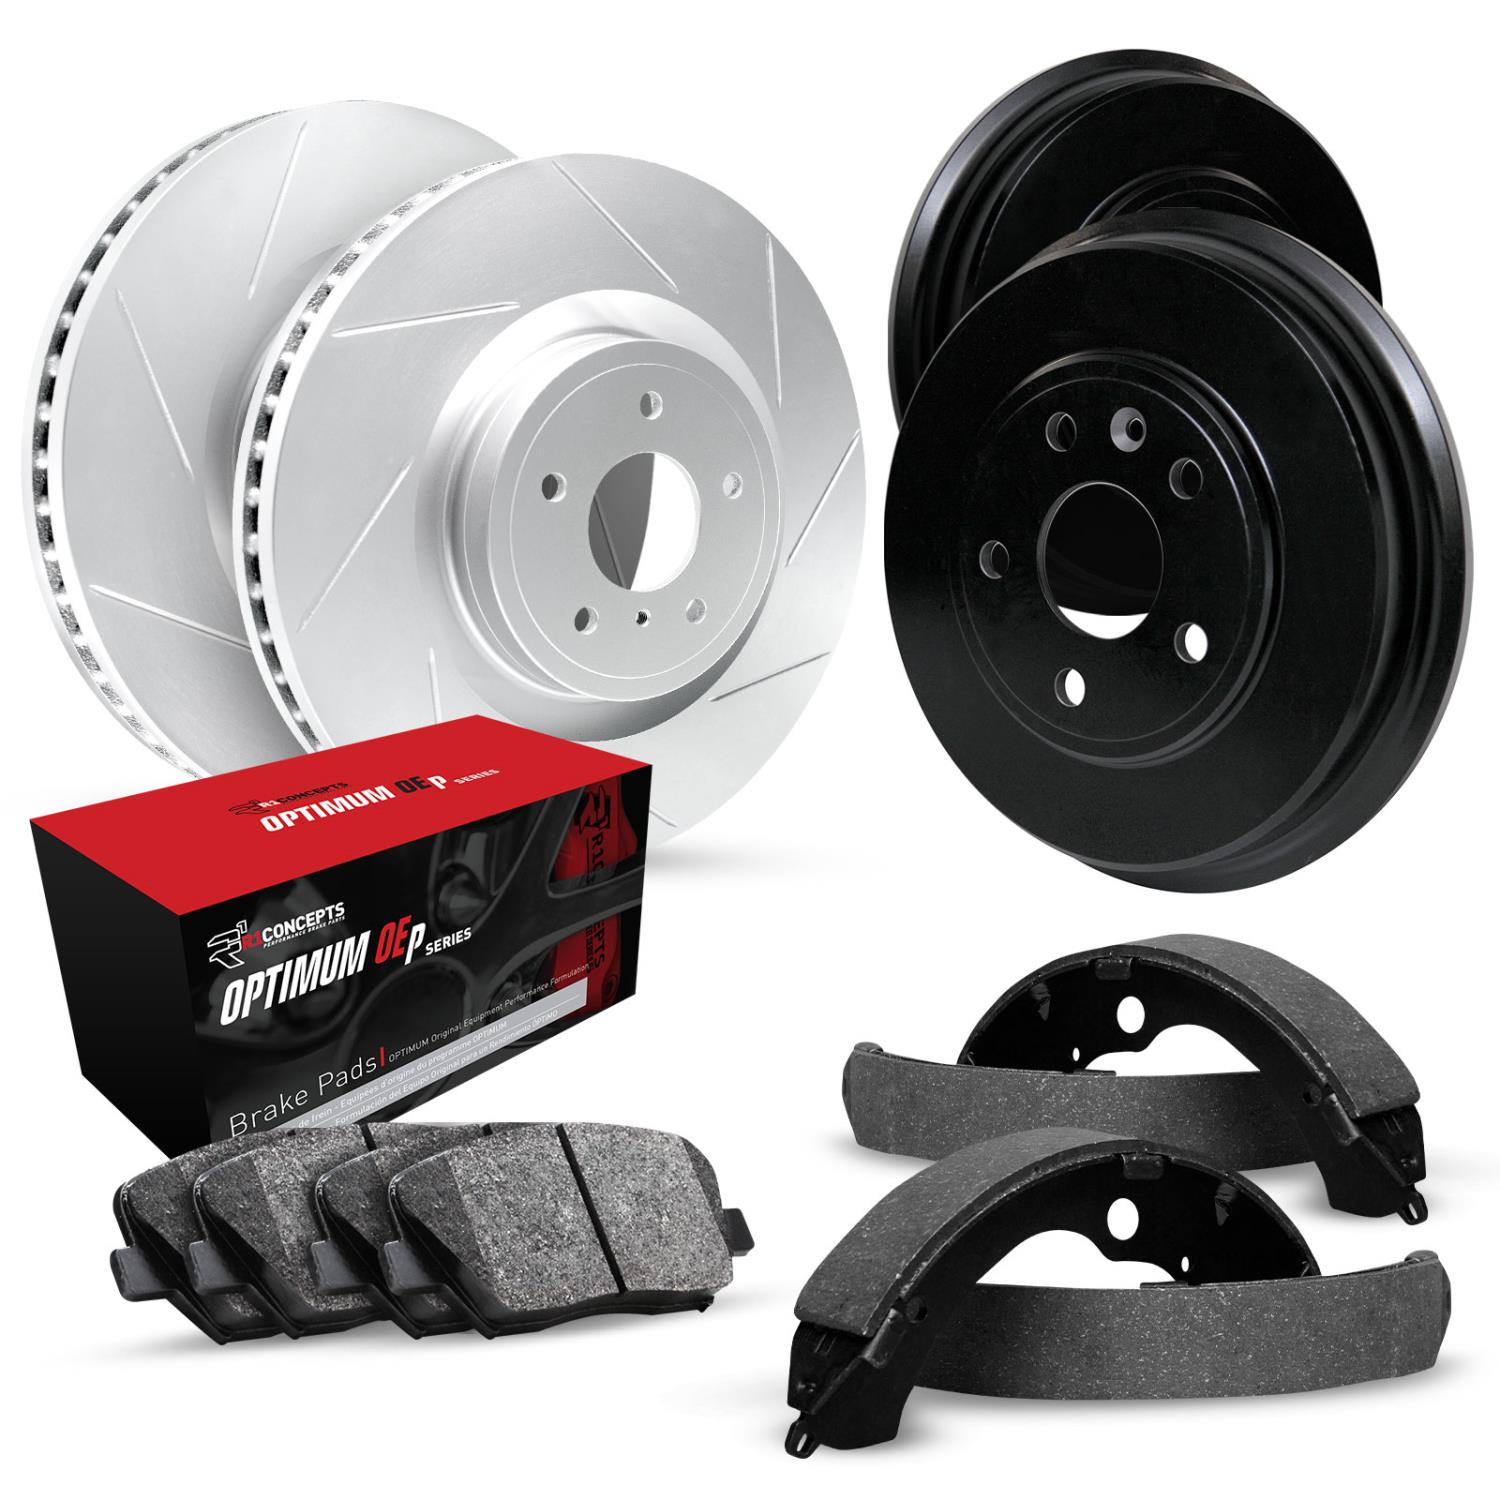 GEO-Carbon Slotted Brake Rotor & Drum Set w/Optimum OE Pads & Shoes, 2004-2008 GM, Position: Front & Rear